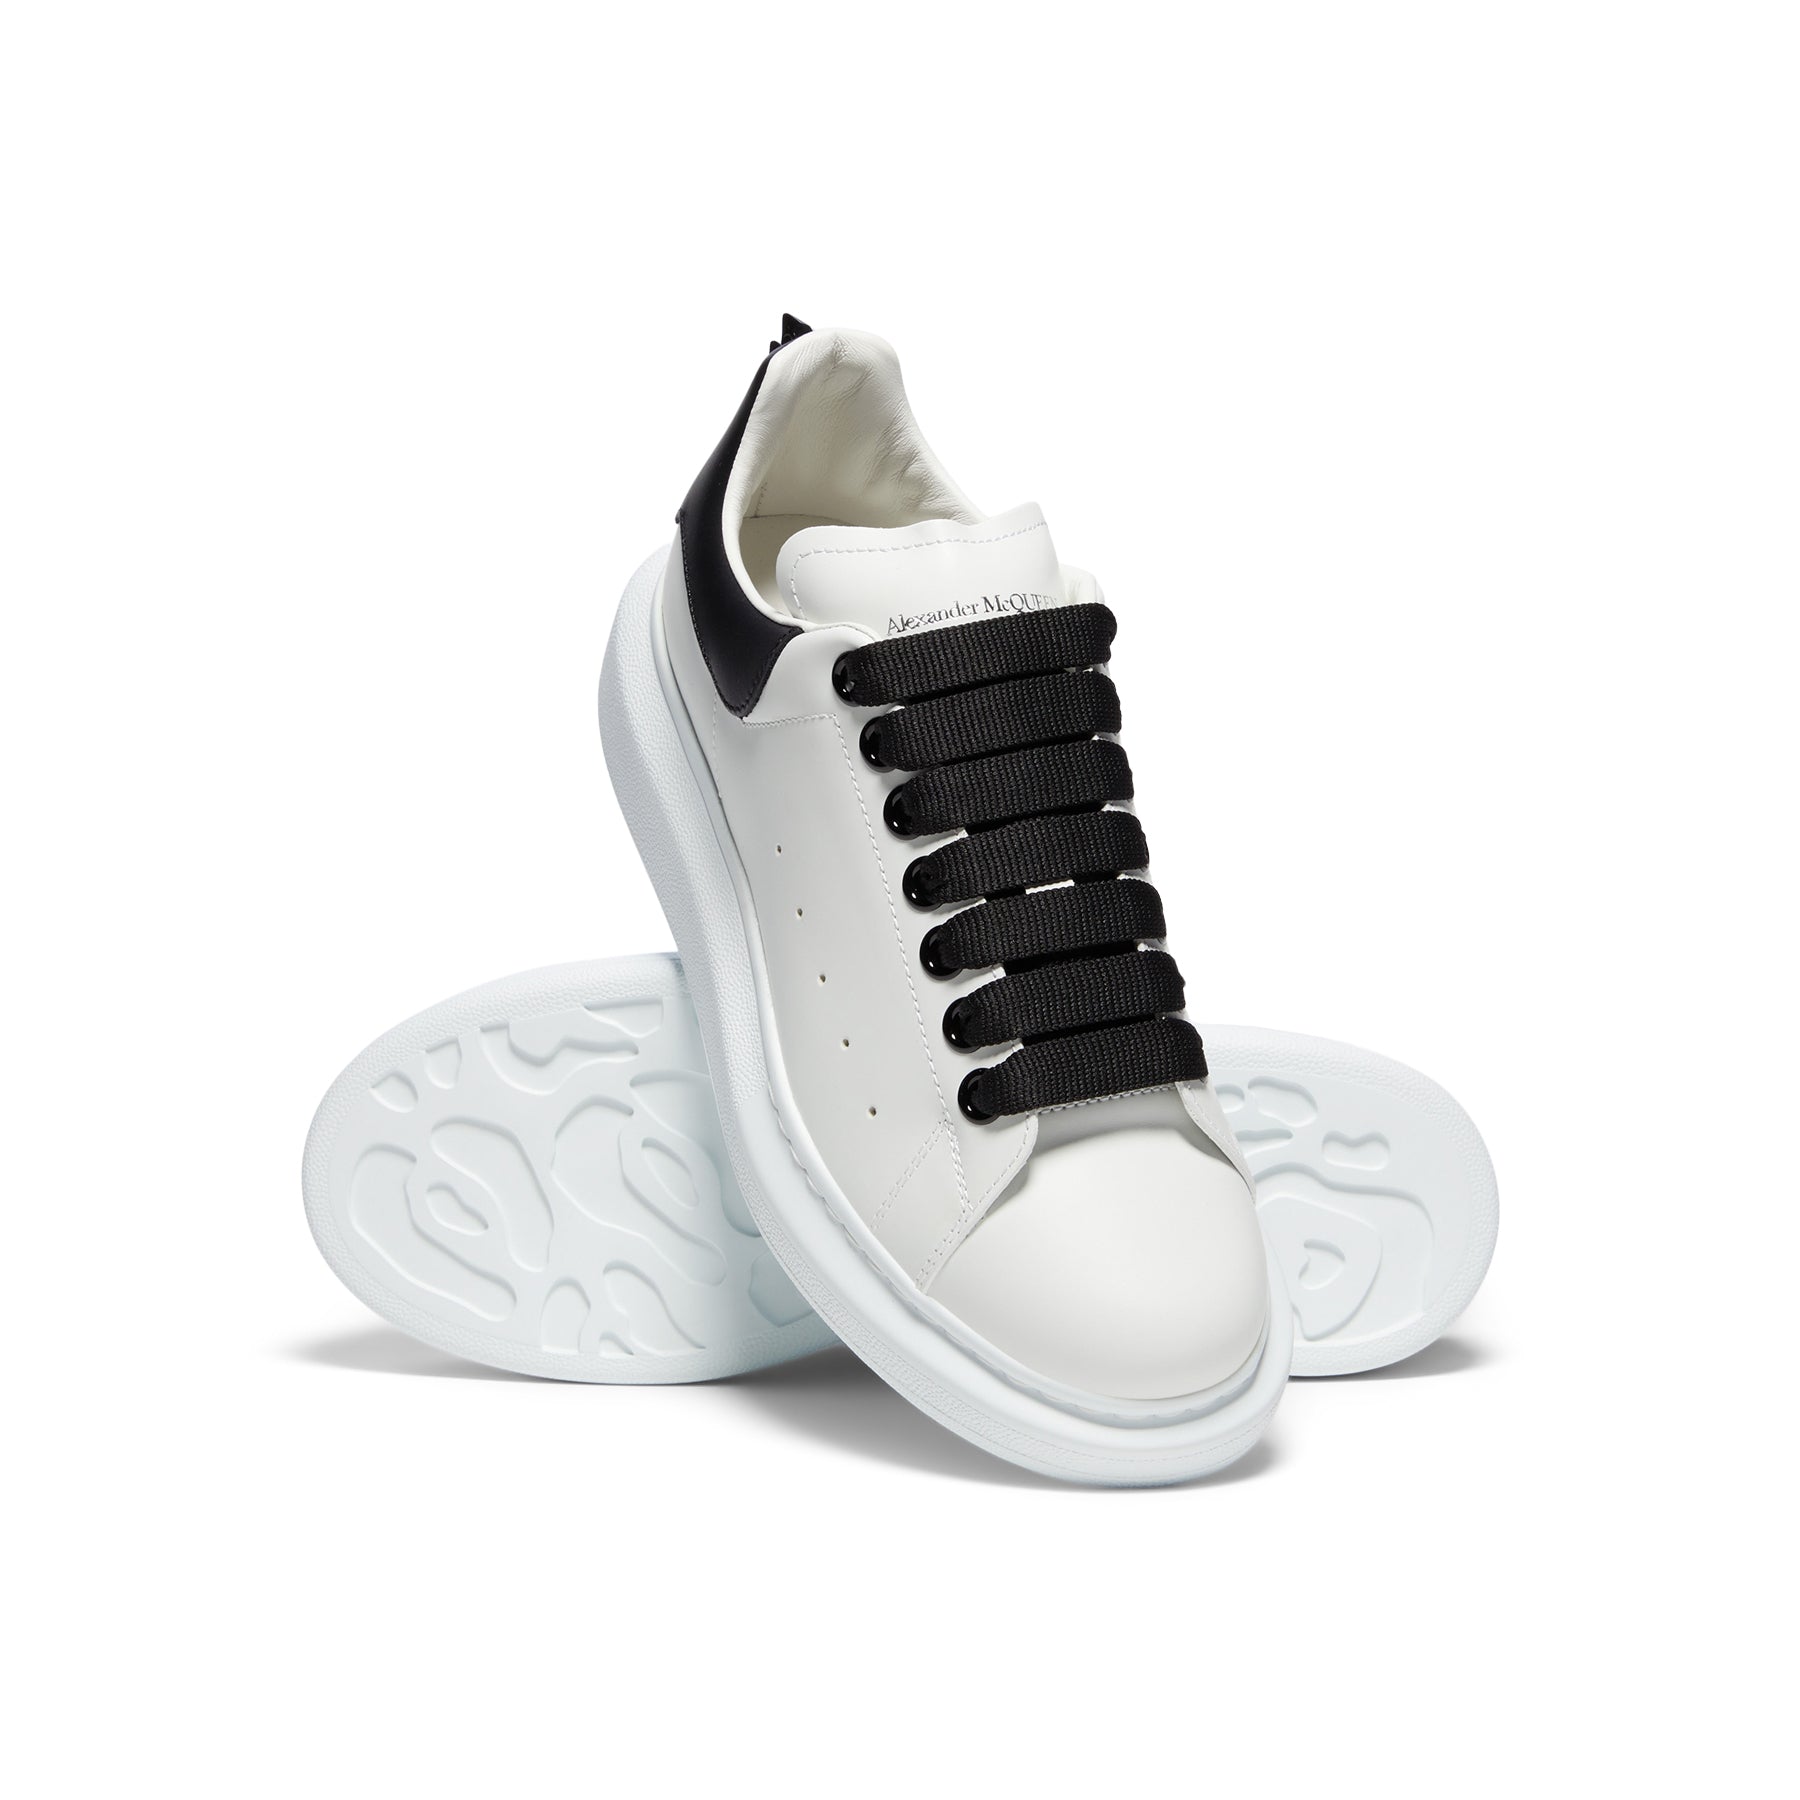 Alexander McQueen Oversized Spiked Sneakers (White/Black)